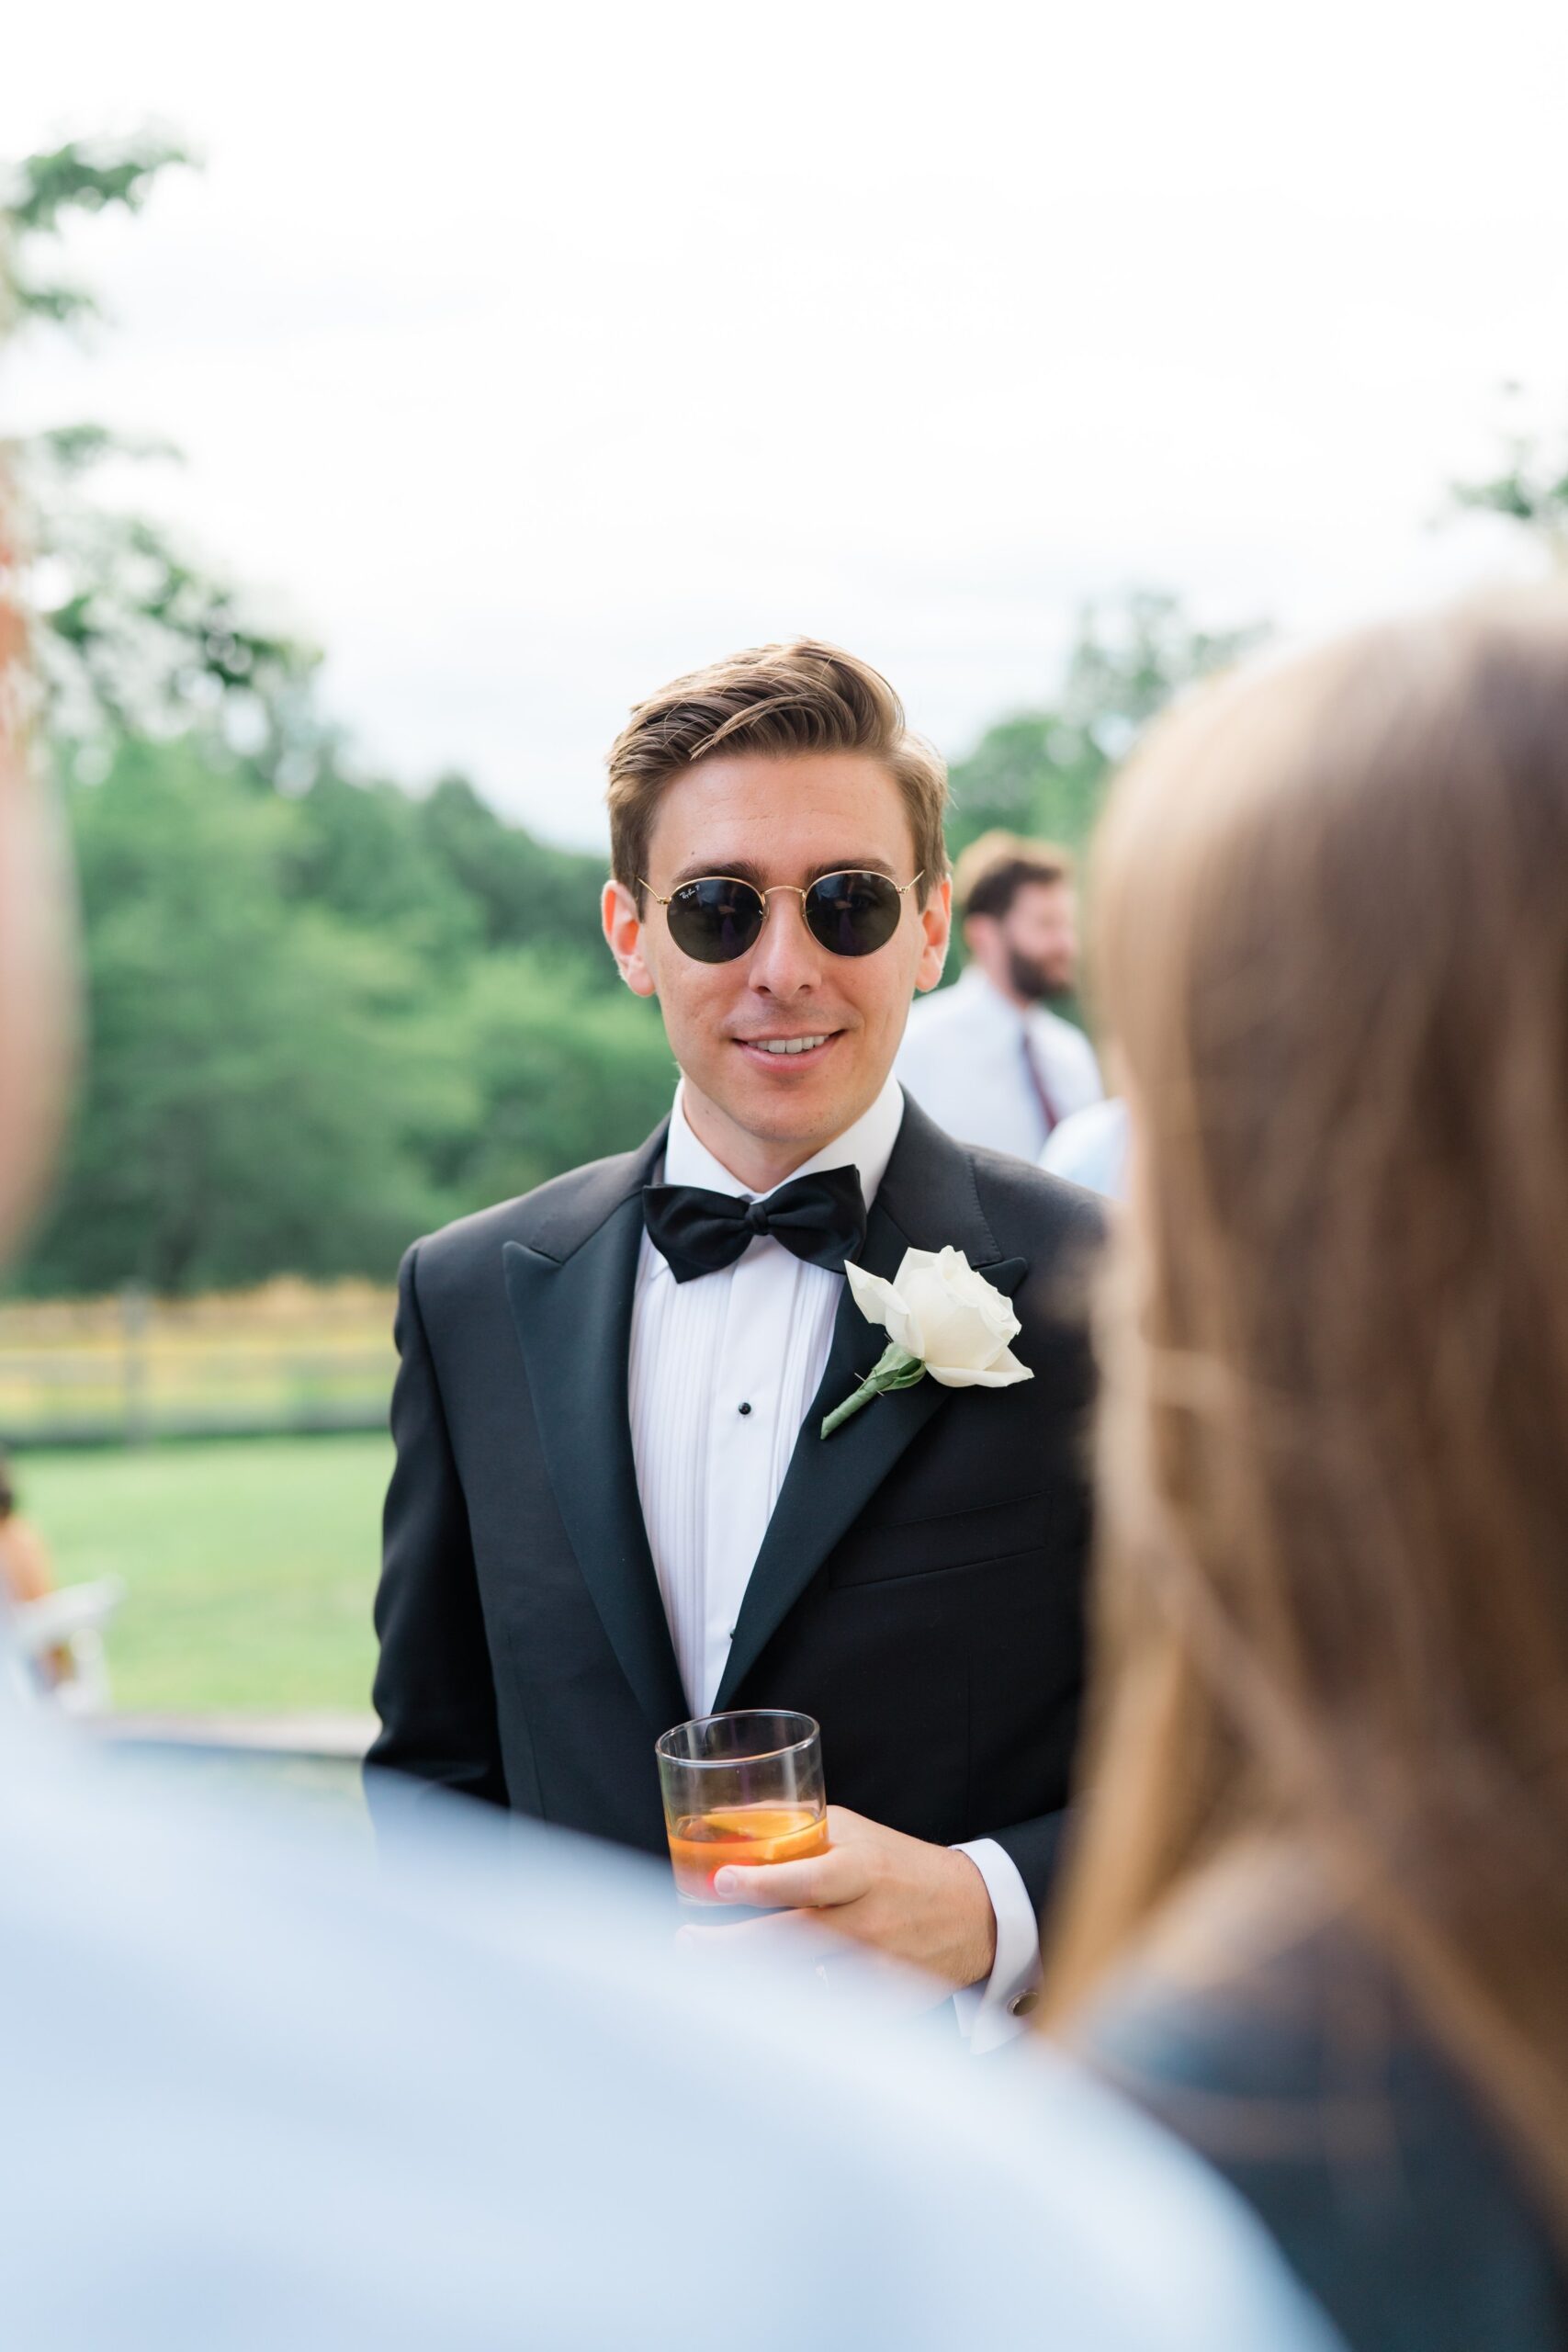 candid moment of the groom at cocktail hour wearing circular gold rimmed ray bans and holding an old fashioned. Black tie groom with large white flower boutonniere. New England Destination Wedding Photographer.